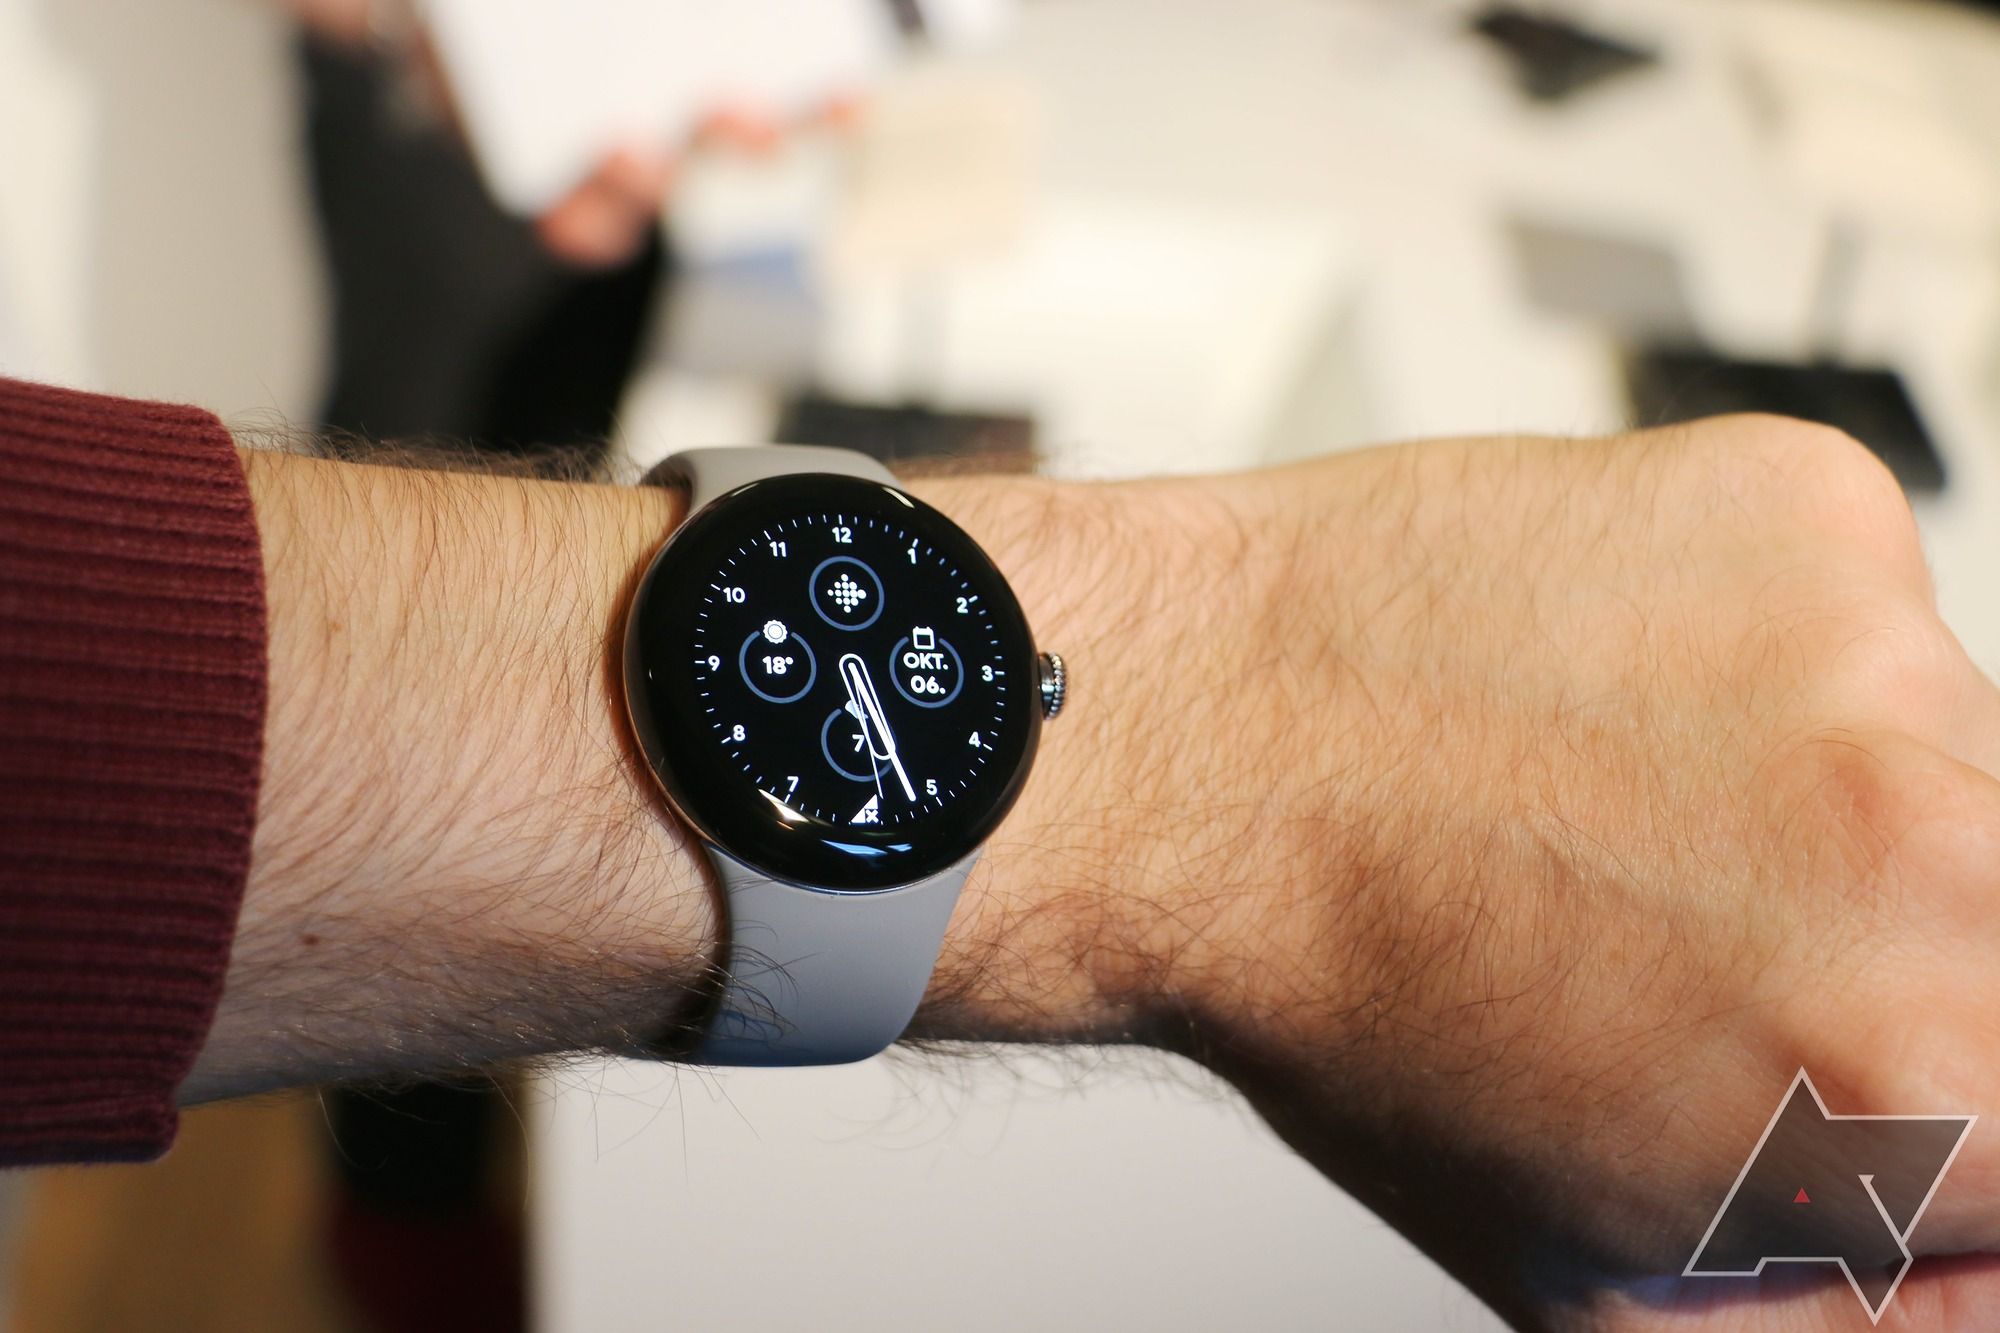 Pixel Watch Hands On: Google's First Smartwatch Shows Promise